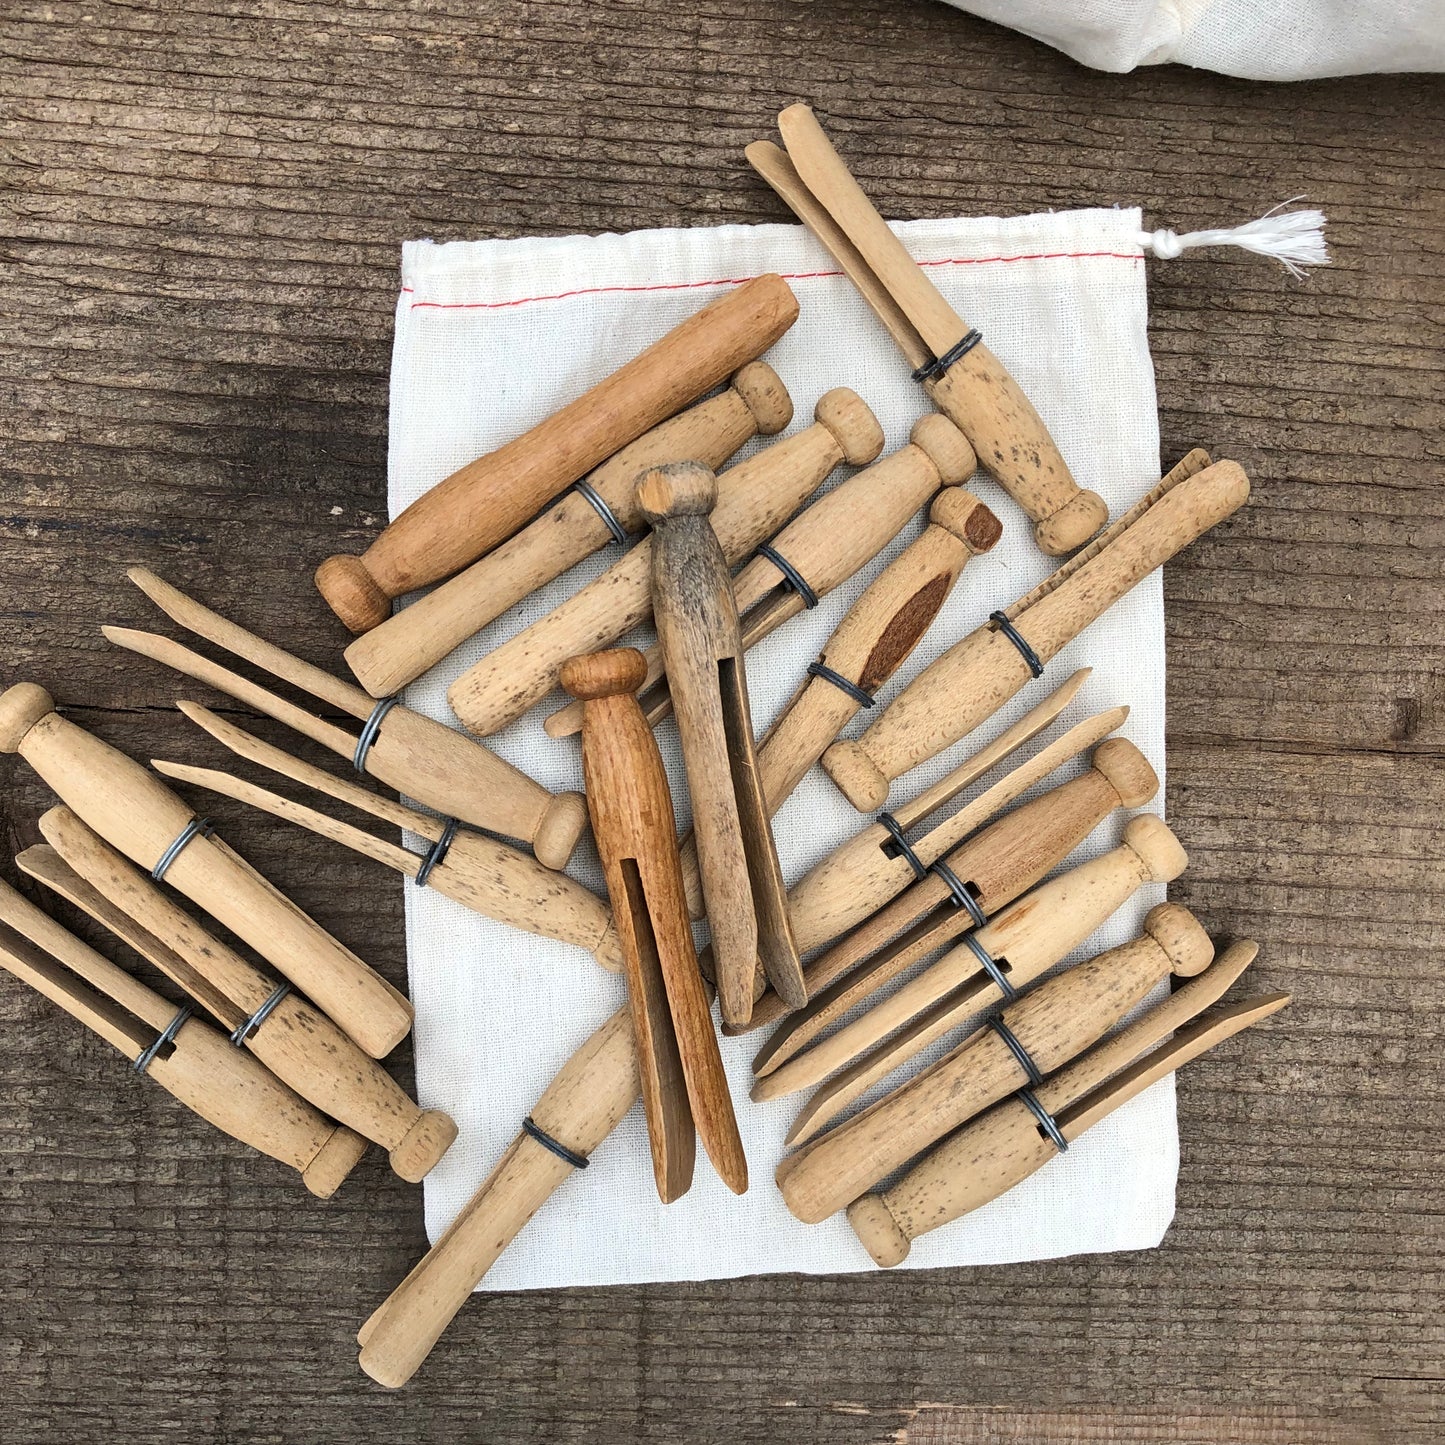 Sack of Vintage Clothes Pins